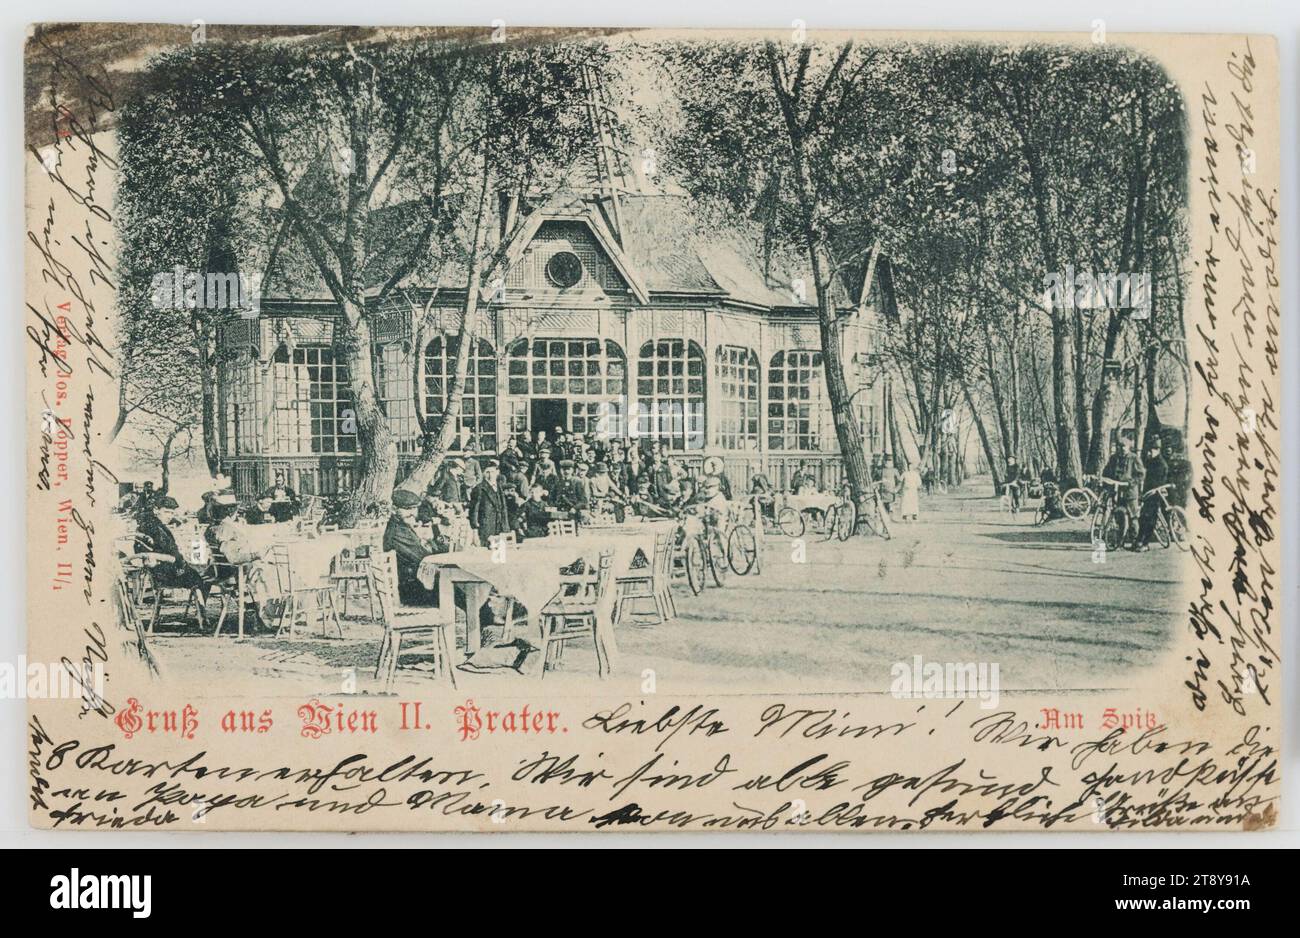 Greeting from Vienna II. Prater. Am Spitz, publisher Josef Popper (J. P. W.), producer, 1899, cardboard, collotype, inscription, FROM, Vienna, TO, Salzburg, ADDRESS, H.W. Fräulein, Salzburg, Poste restante, Salzburg, NACHRICHT, Dearest Mimi! We have received the 8 cards. We are all in good health. Hand kisses to Papa and Mama from all of us. Best regards to Hilda and d(ich), Greti Bauer wrote me a letter and sends the best regards to you, Richard is now again two nights through not very good, sends Frieda, Prater, leisure and recreation, food and drink, hotel and catering Stock Photo